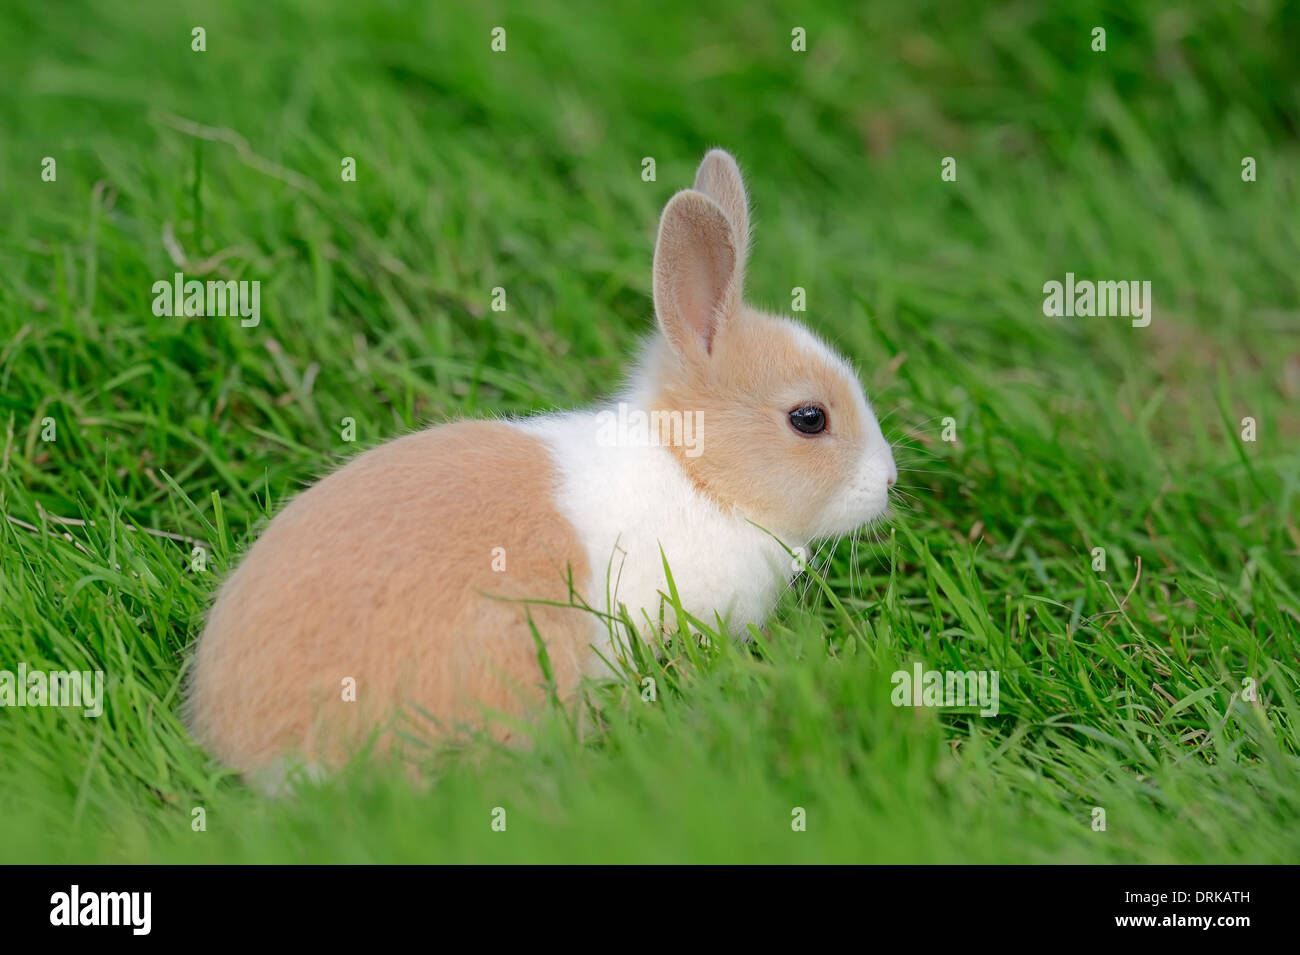 Young Dwarf Rabbit (Oryctolagus cuniculus forma domestica) Stock Photo